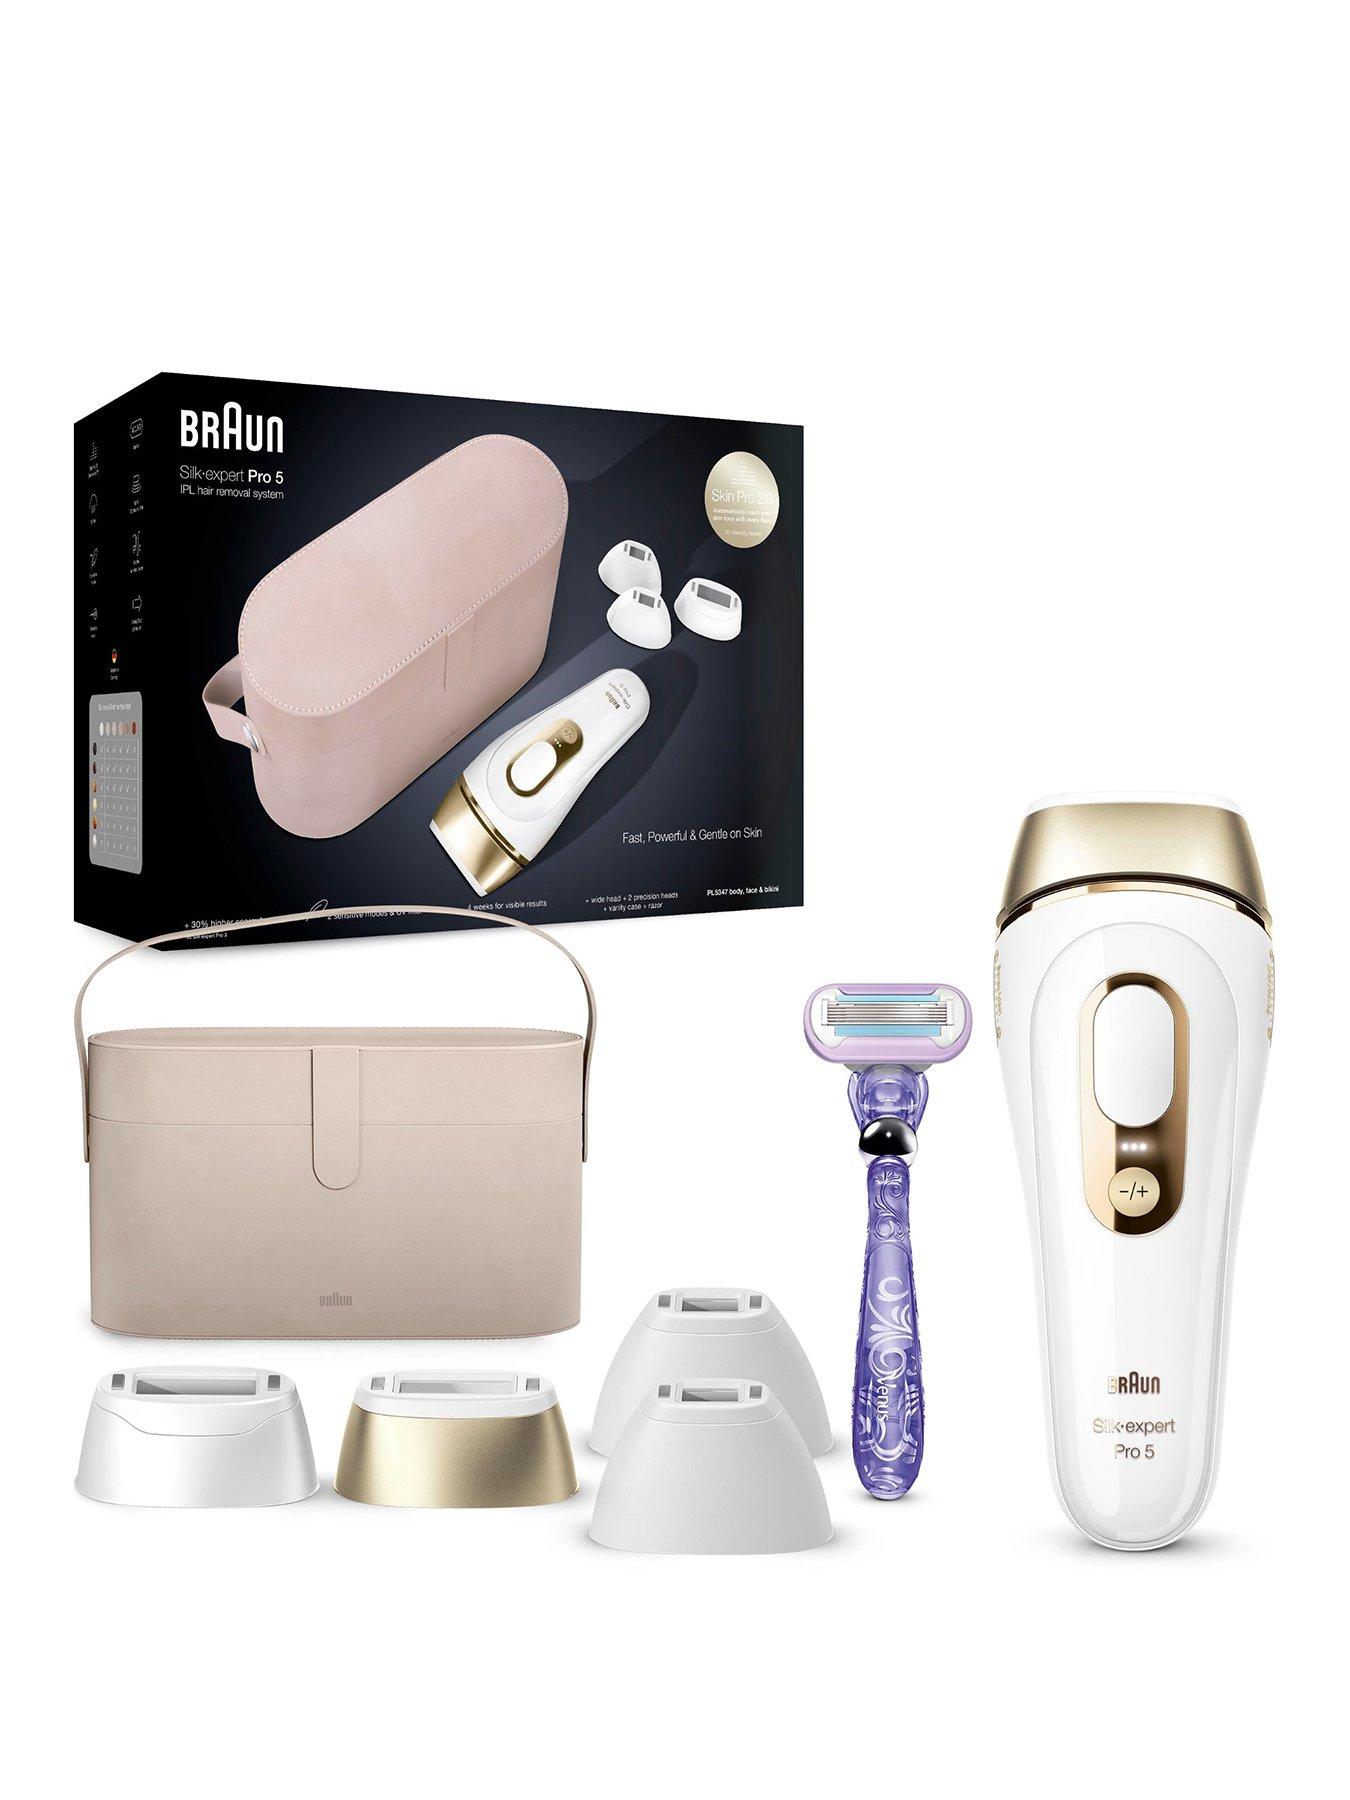 Braun IPL Silk-Expert Pro 5, At Home Hair Removal Device with Pouch PL5257  - White/Gold